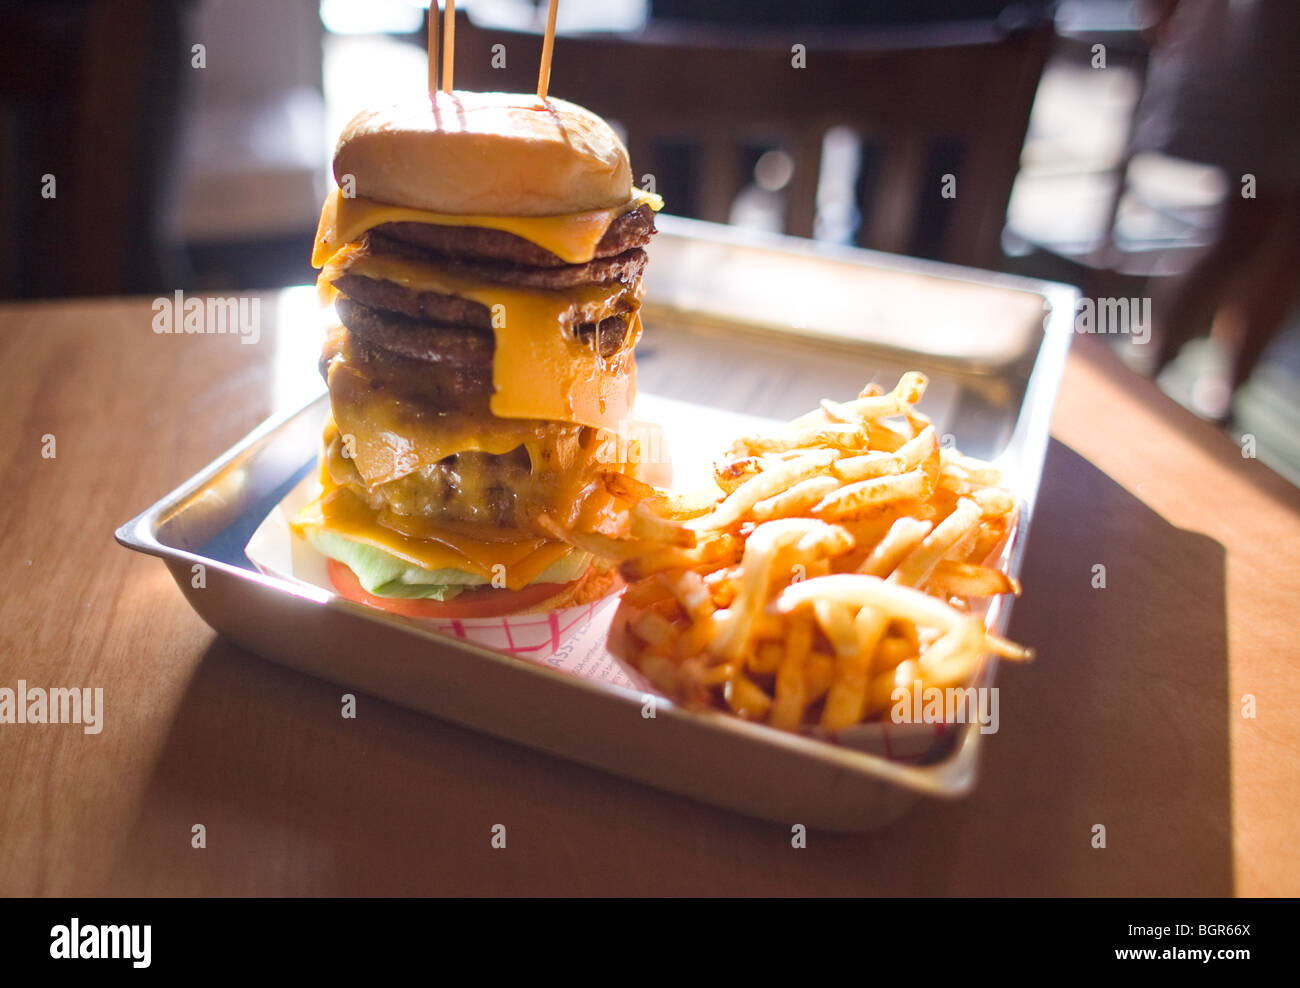 A 10 patty hamburger with a side of fries Stock Photo